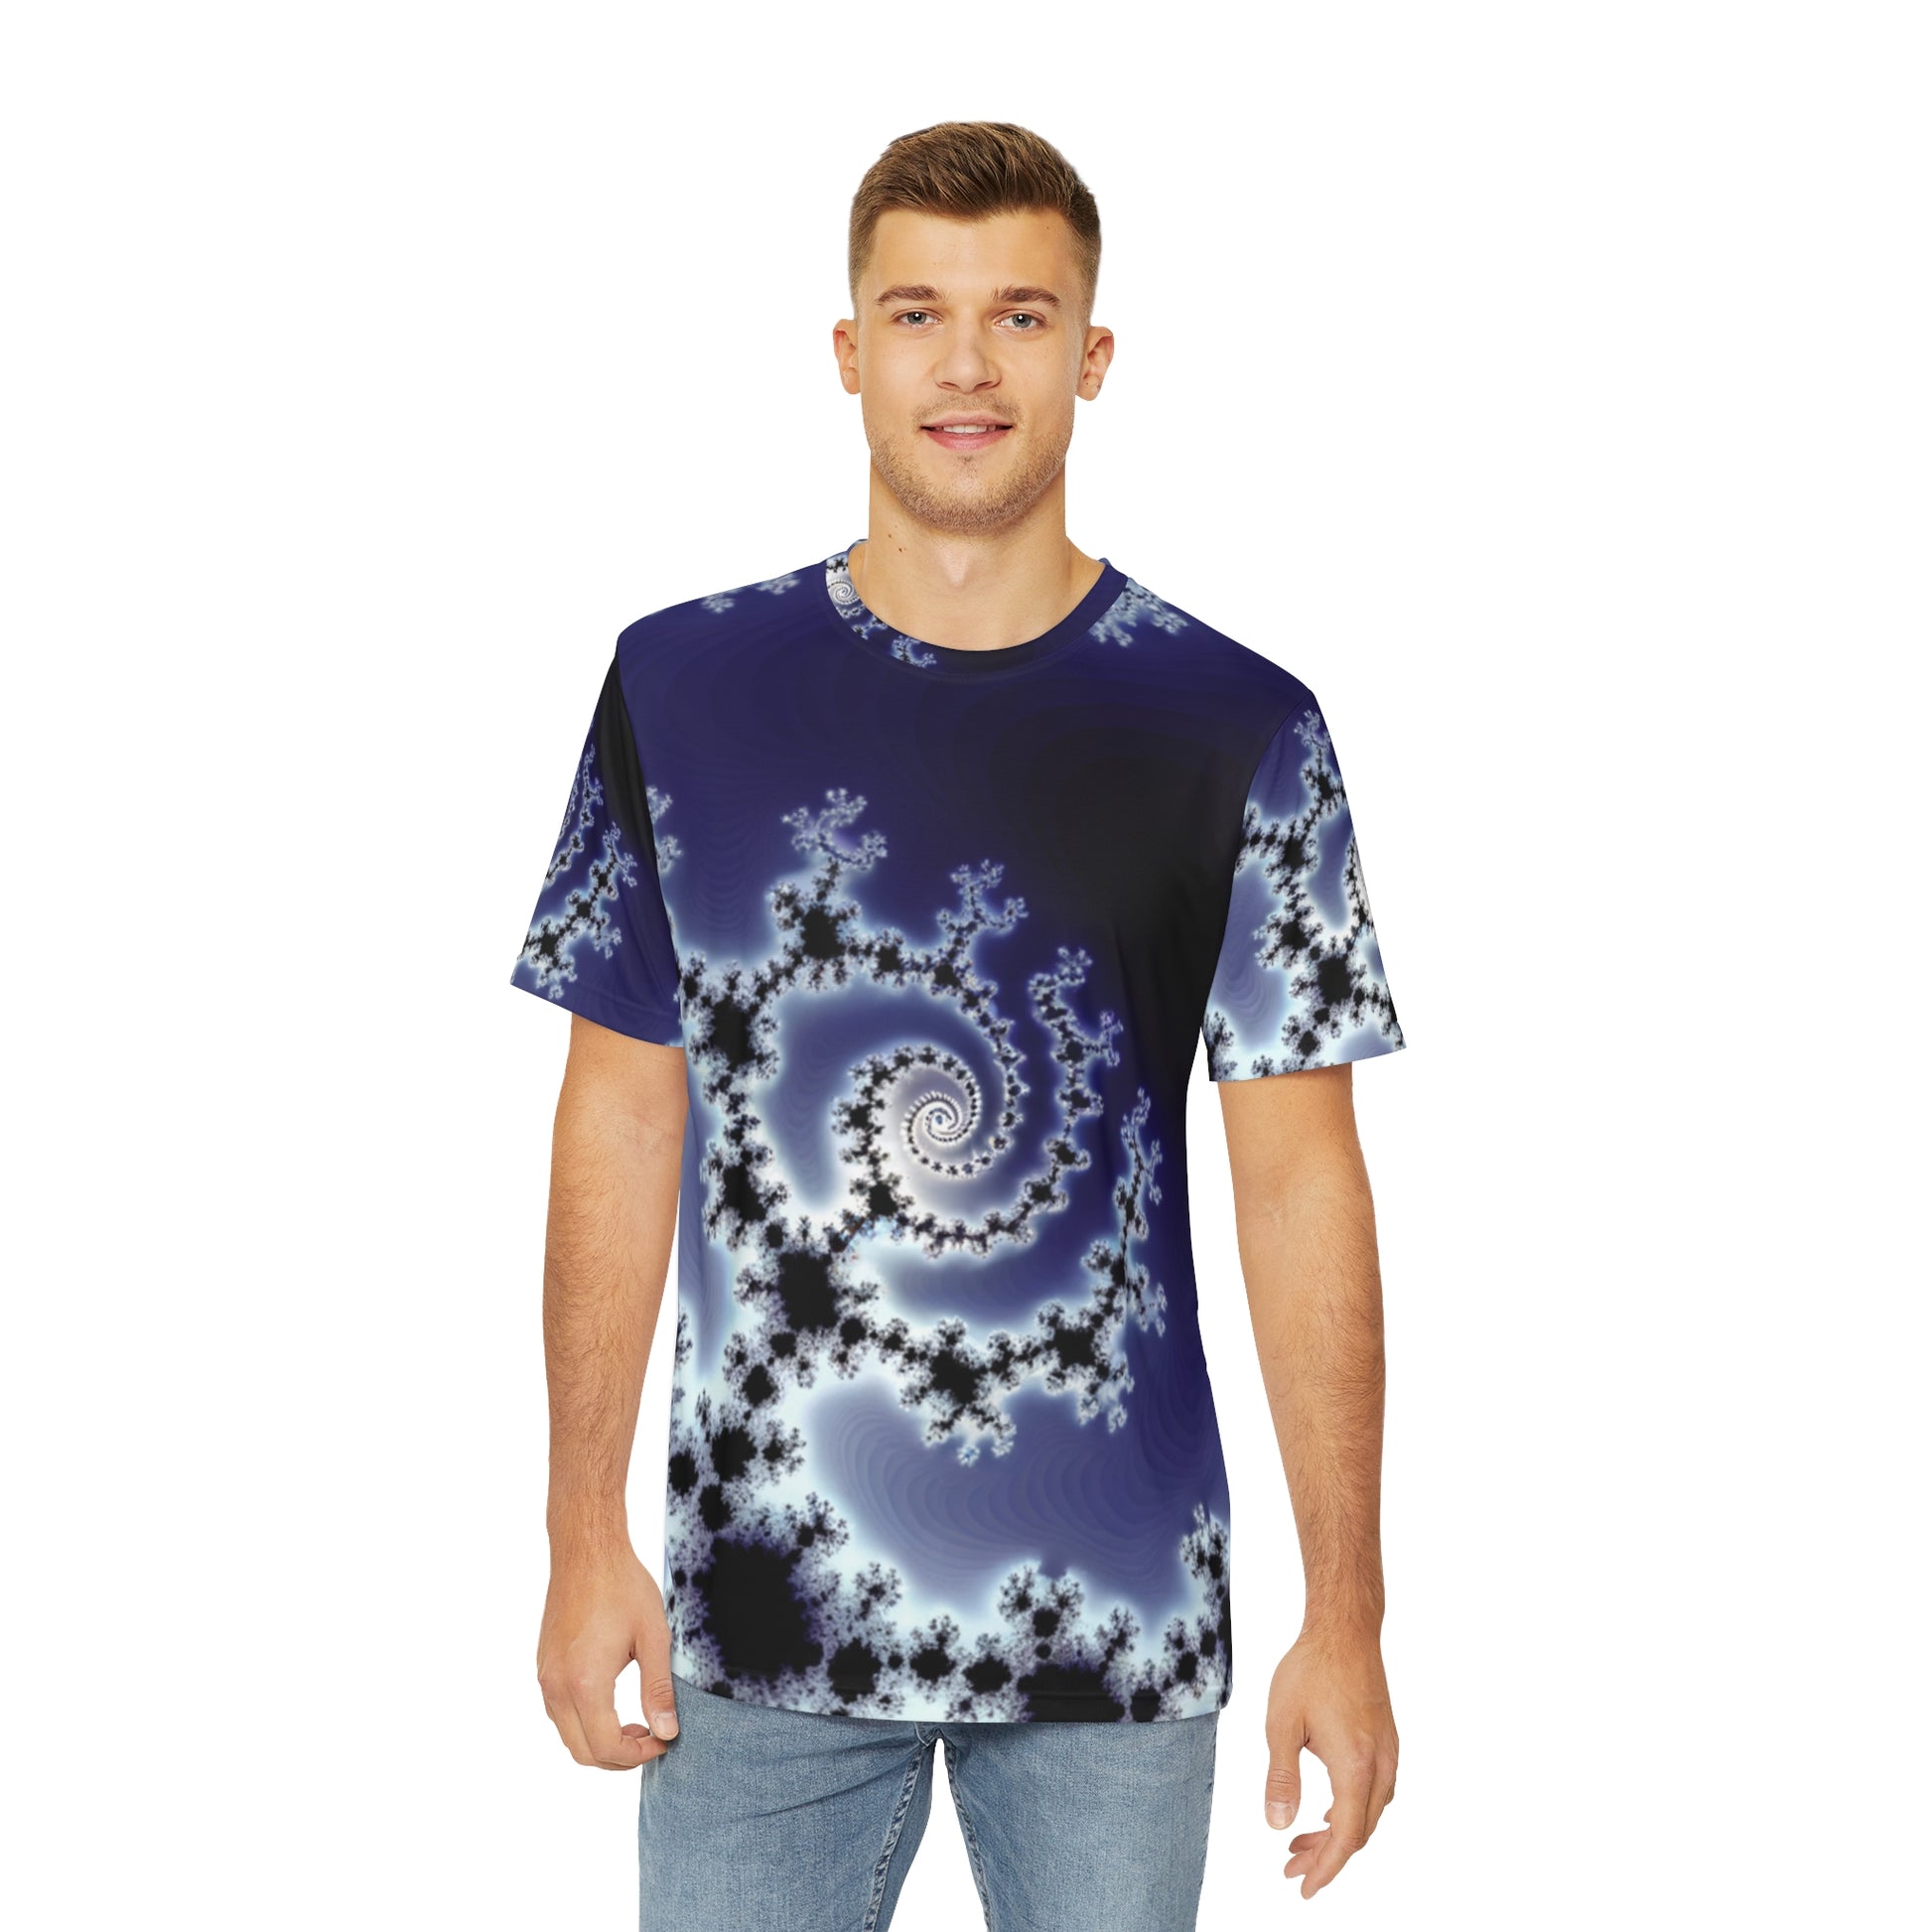 Front view of the Celestial Fractal Elegance Crewneck Pullover All-Over Print Short-Sleeved Shirt purple black white fractal pattern paired with casual denim pants worn by a white man